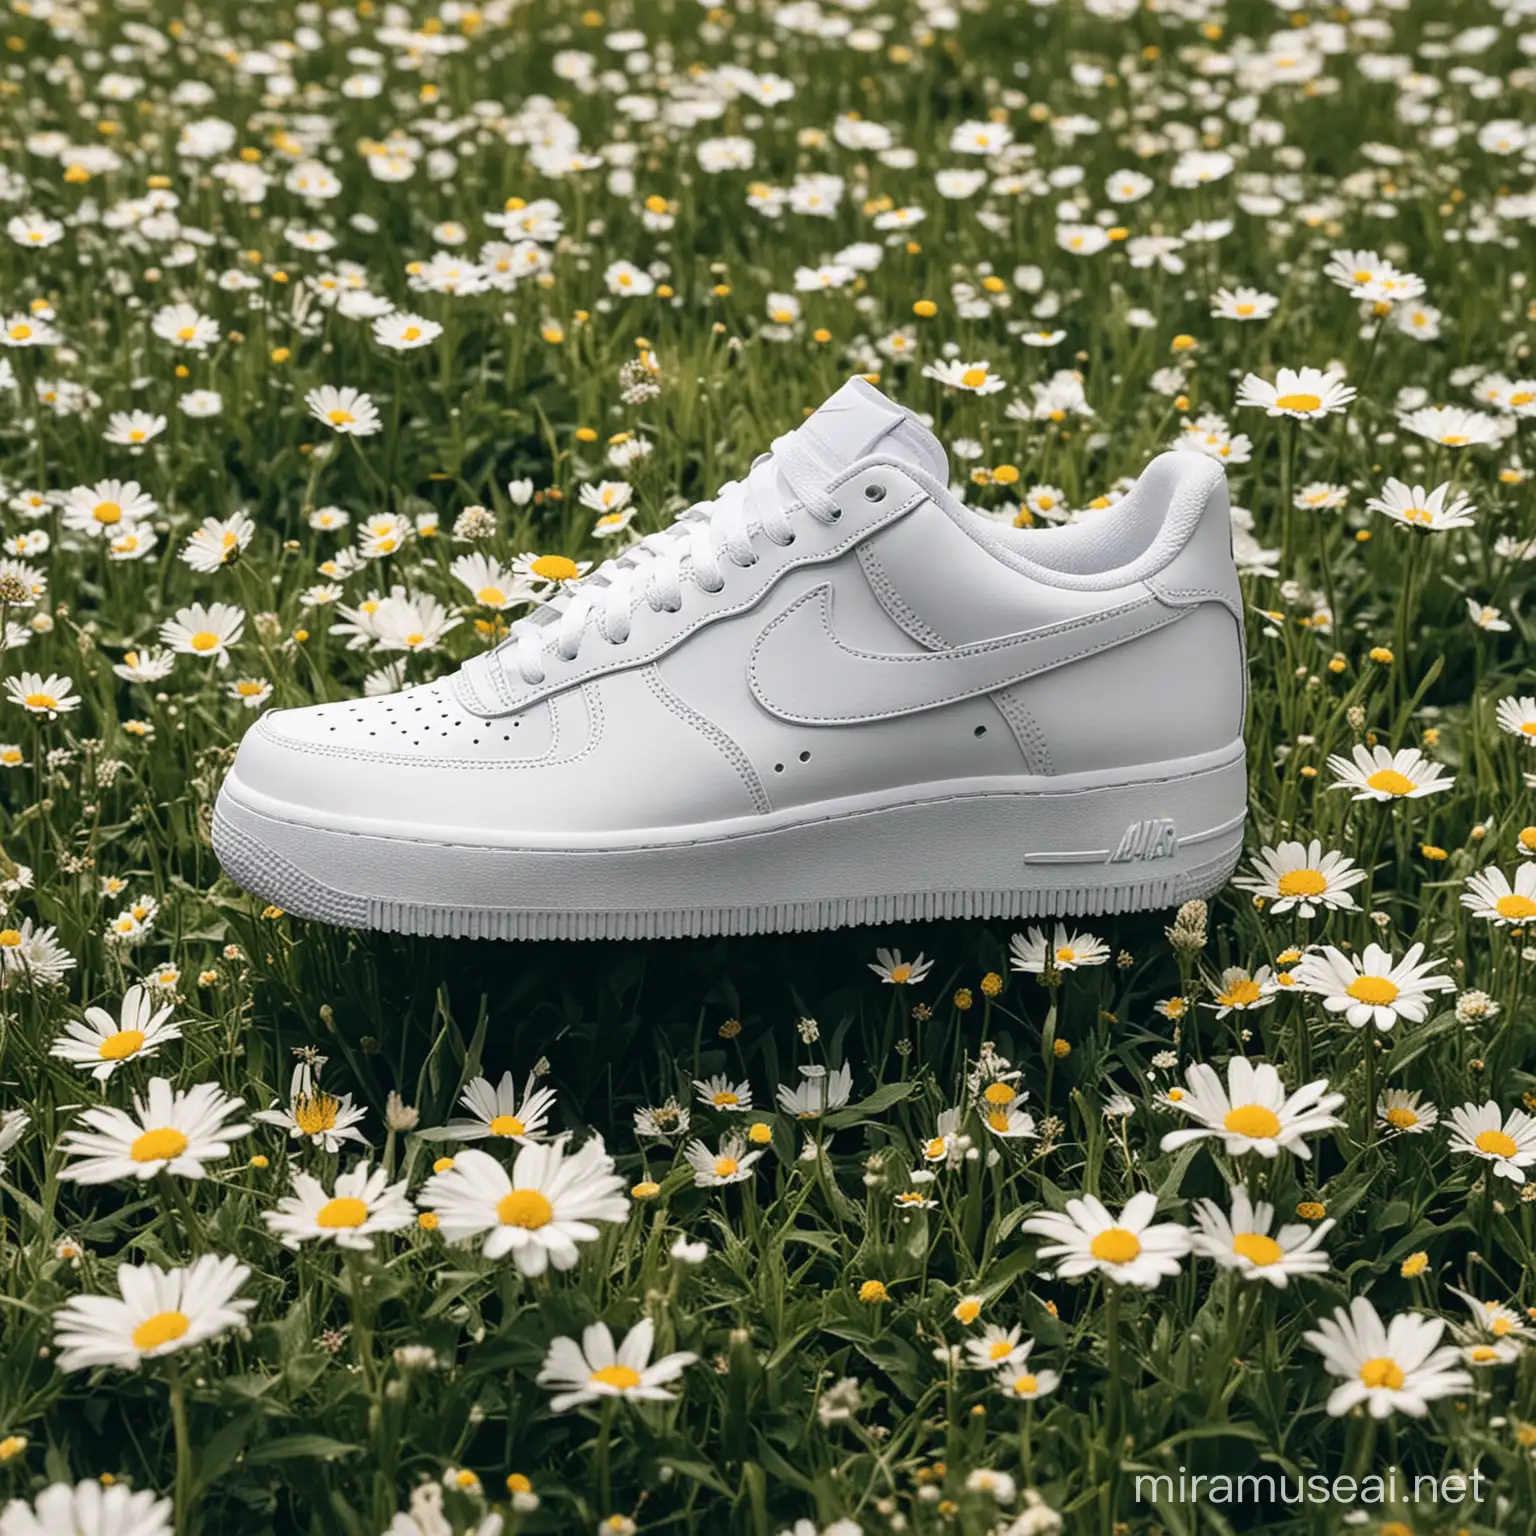 Make a nike air force all white shoe on a meadow with flowers on the shoe

